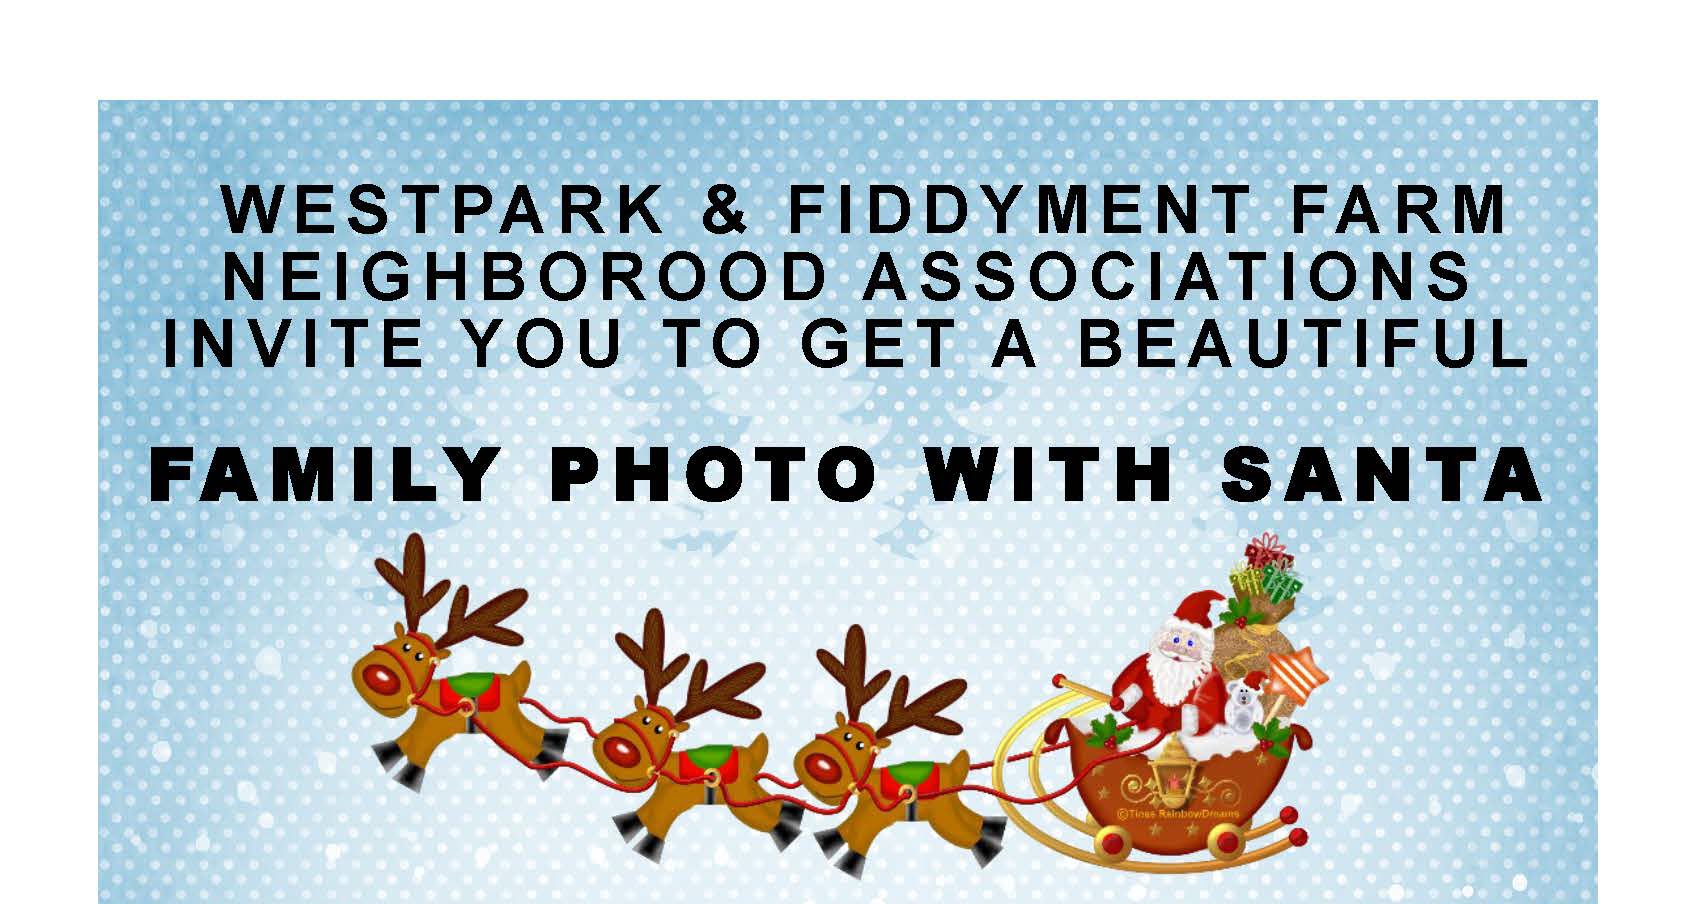 More information about "Family Photo With Santa - Saturday, December 10th (FREE)"